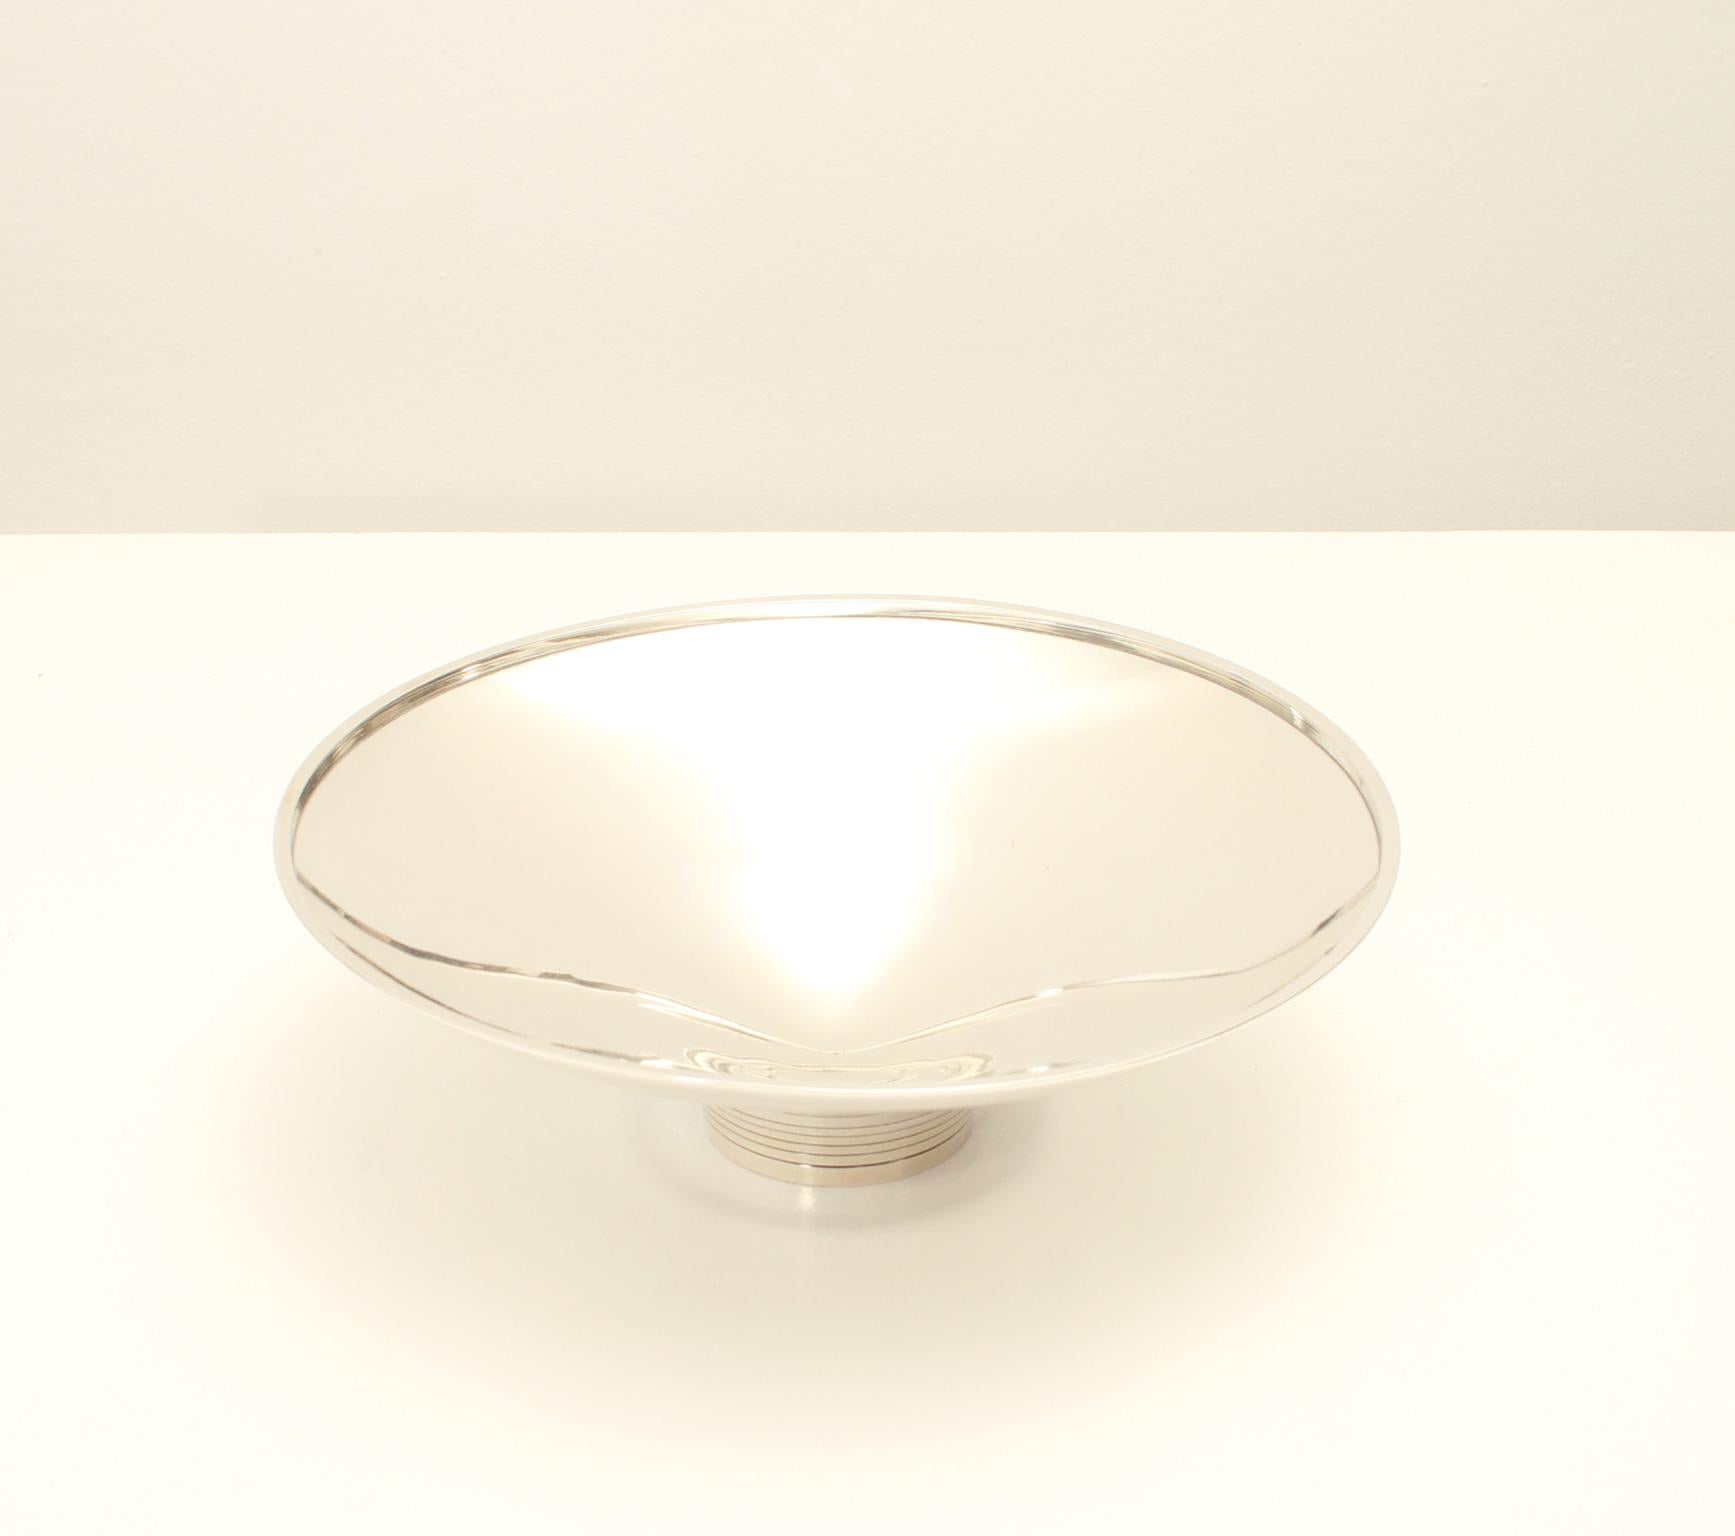 Spanish Georg Jensen Sterling Silver Bowl from 1950s For Sale